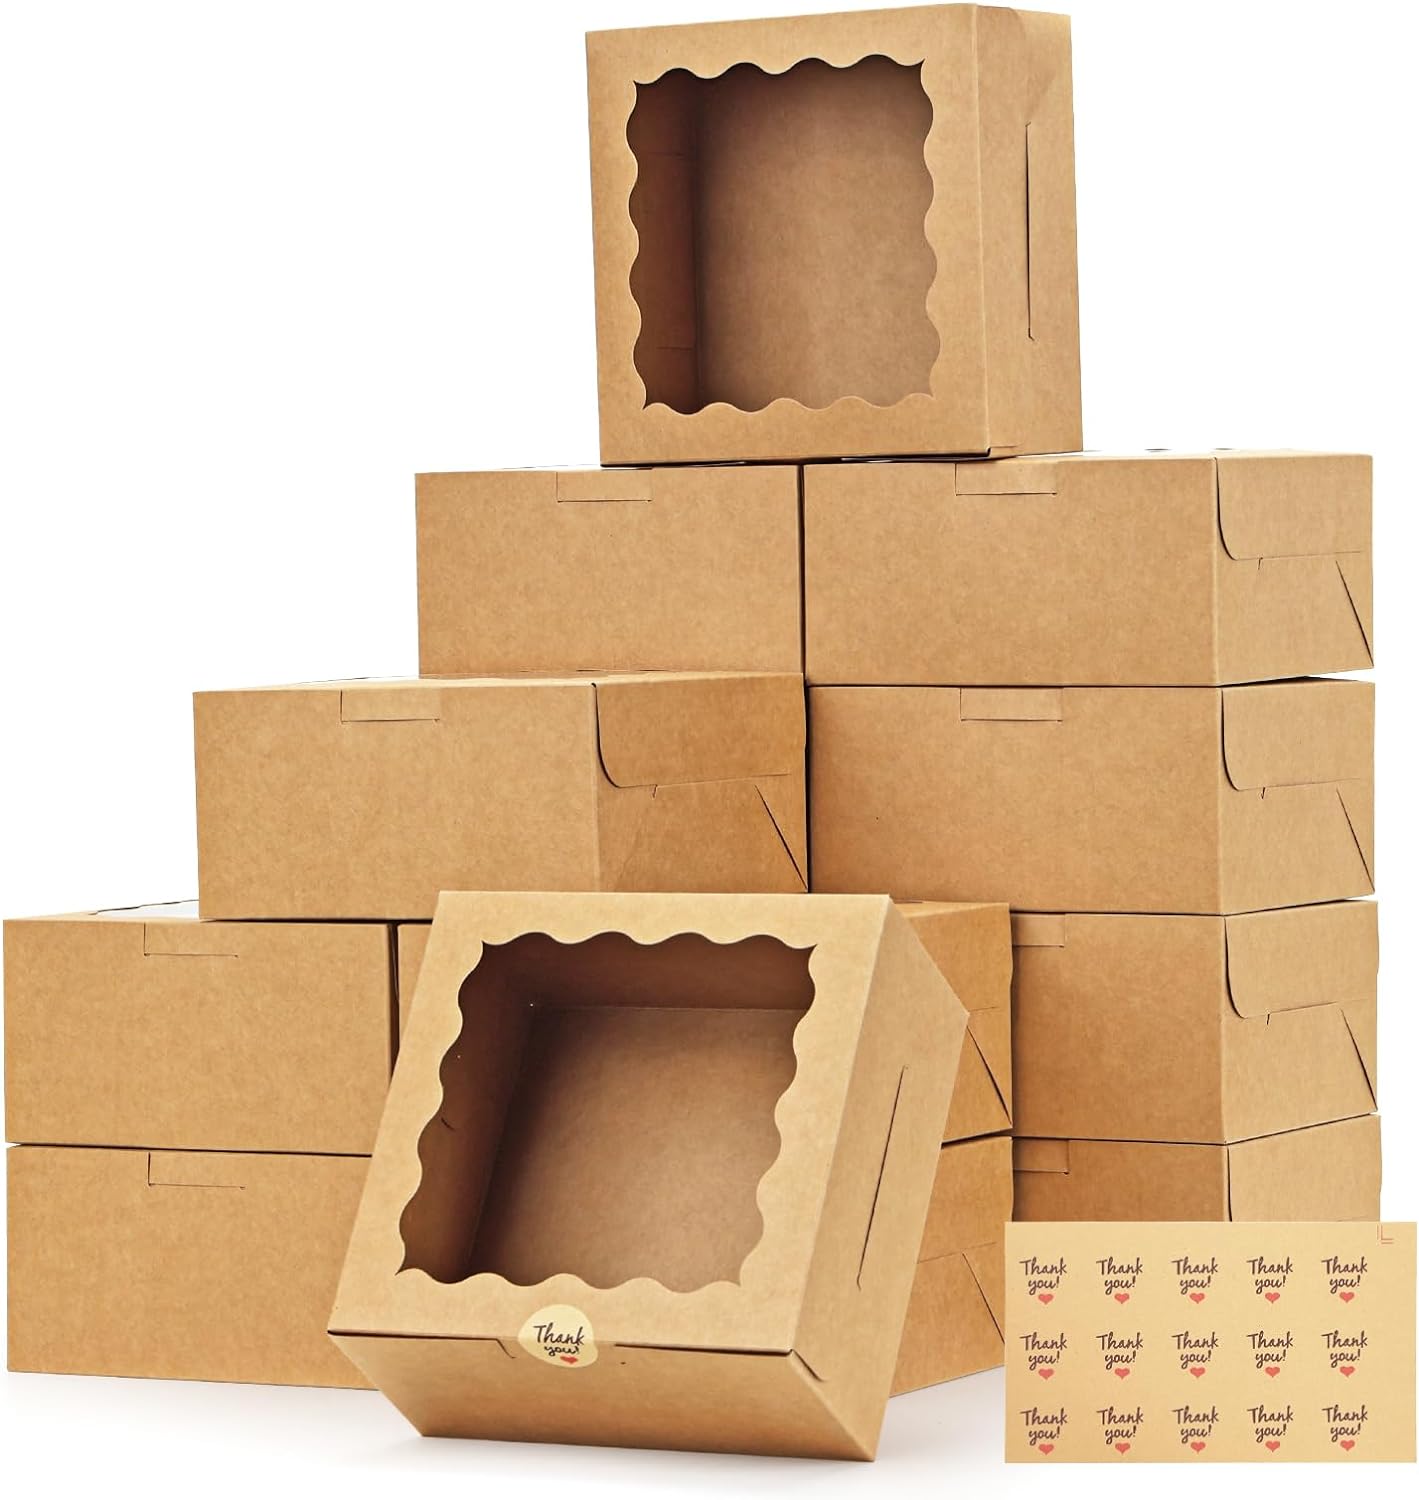 Moretoes 15pcs 6x6x3in Cookie Boxes with Window, Bakery Boxes Kraft Paper Treat Boxes Small Cake Box for Dessert Pastry Pie Donuts, Brown